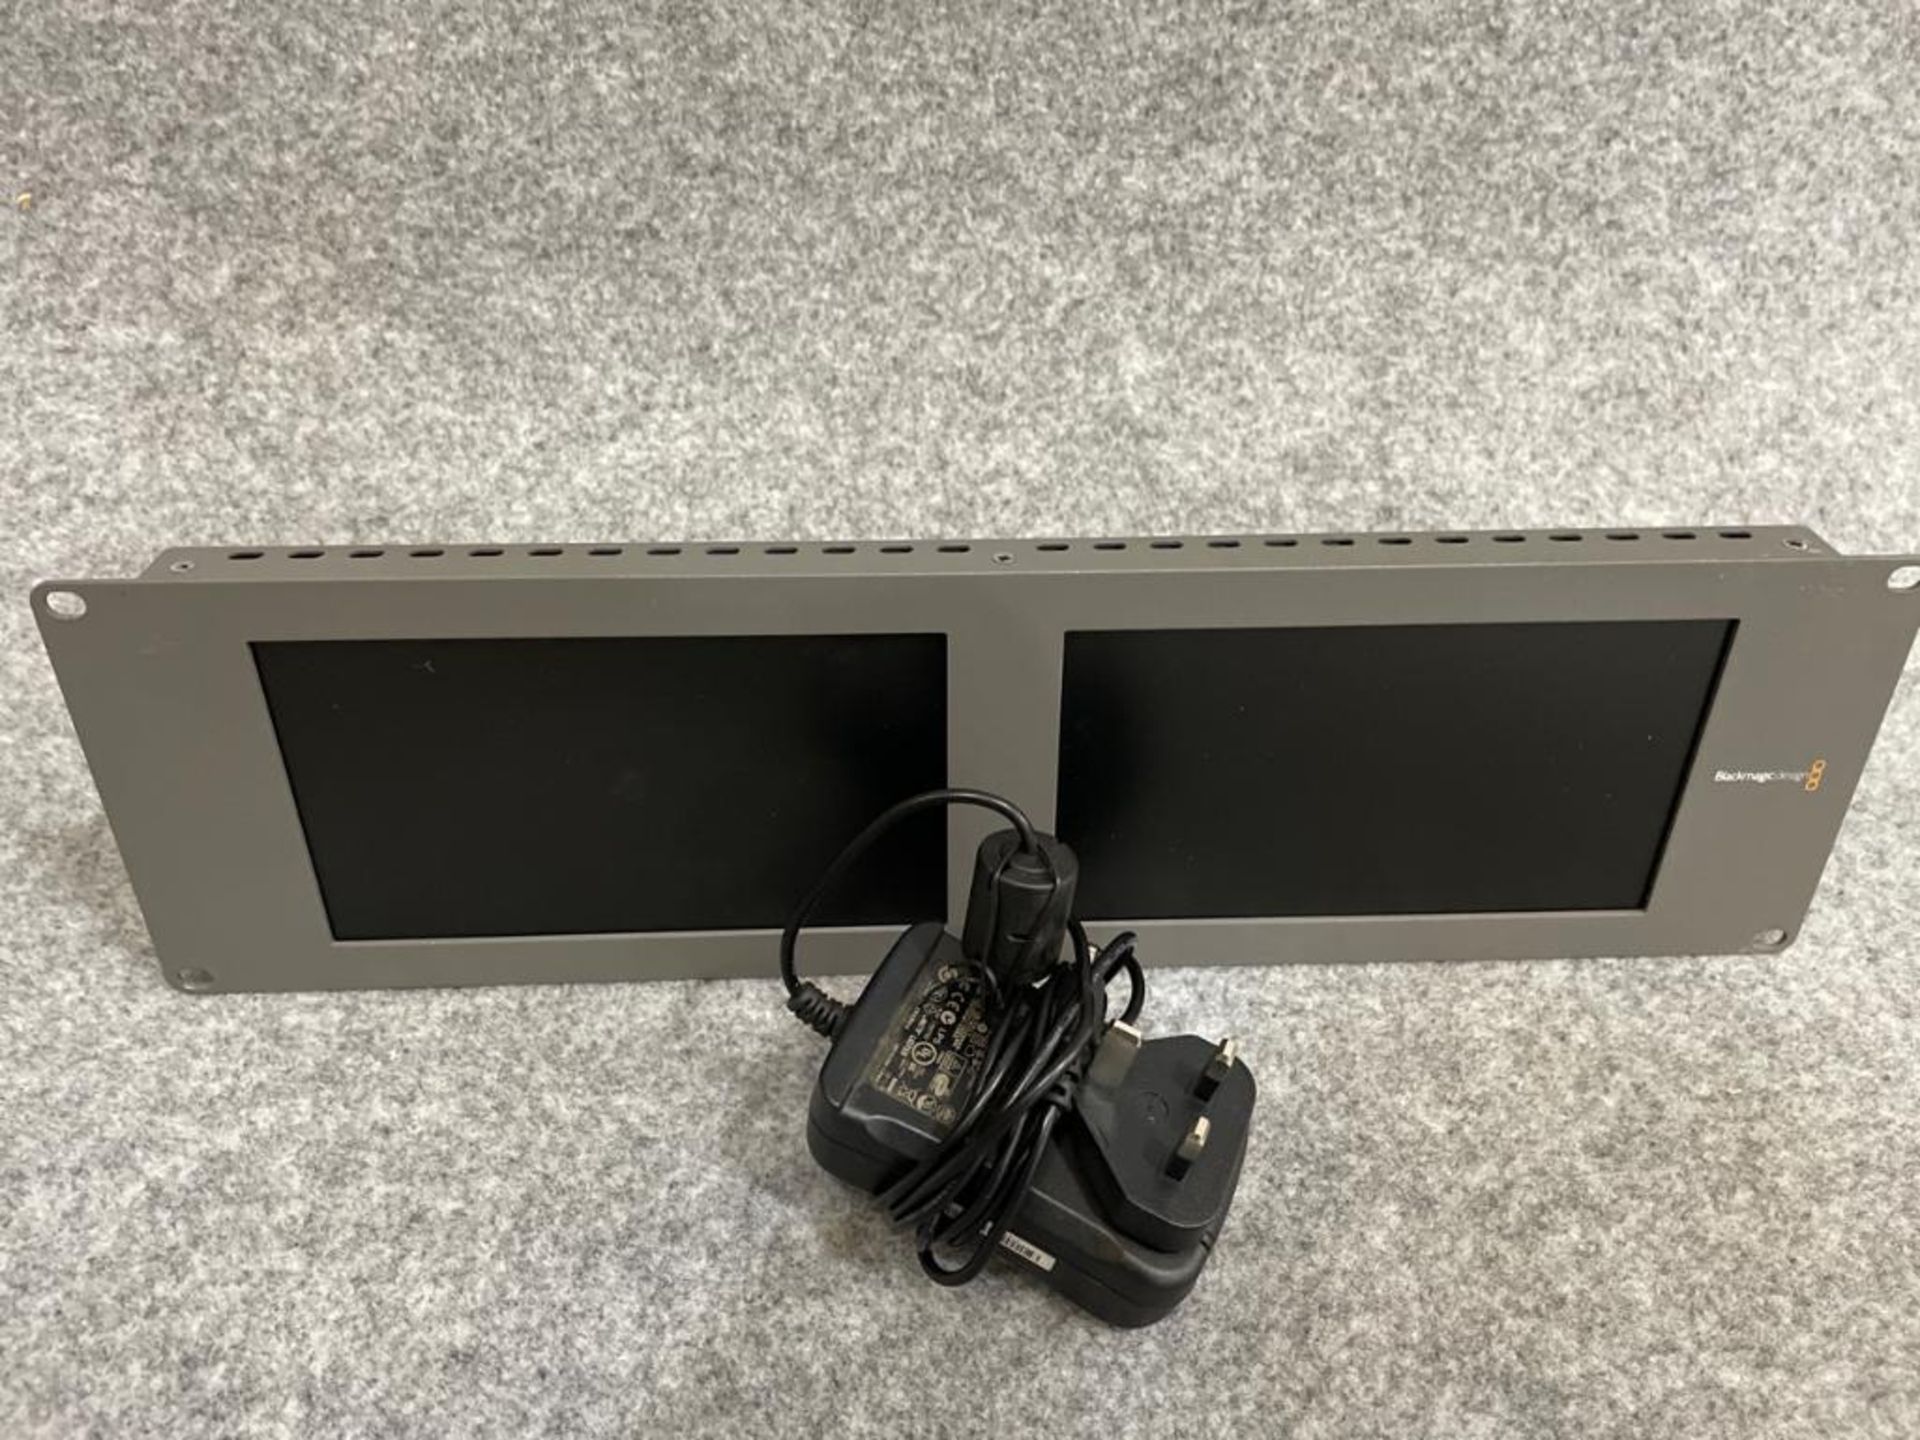 BlackMagic Dual HD Monitor with power supply SN: 1391717 - Image 3 of 3